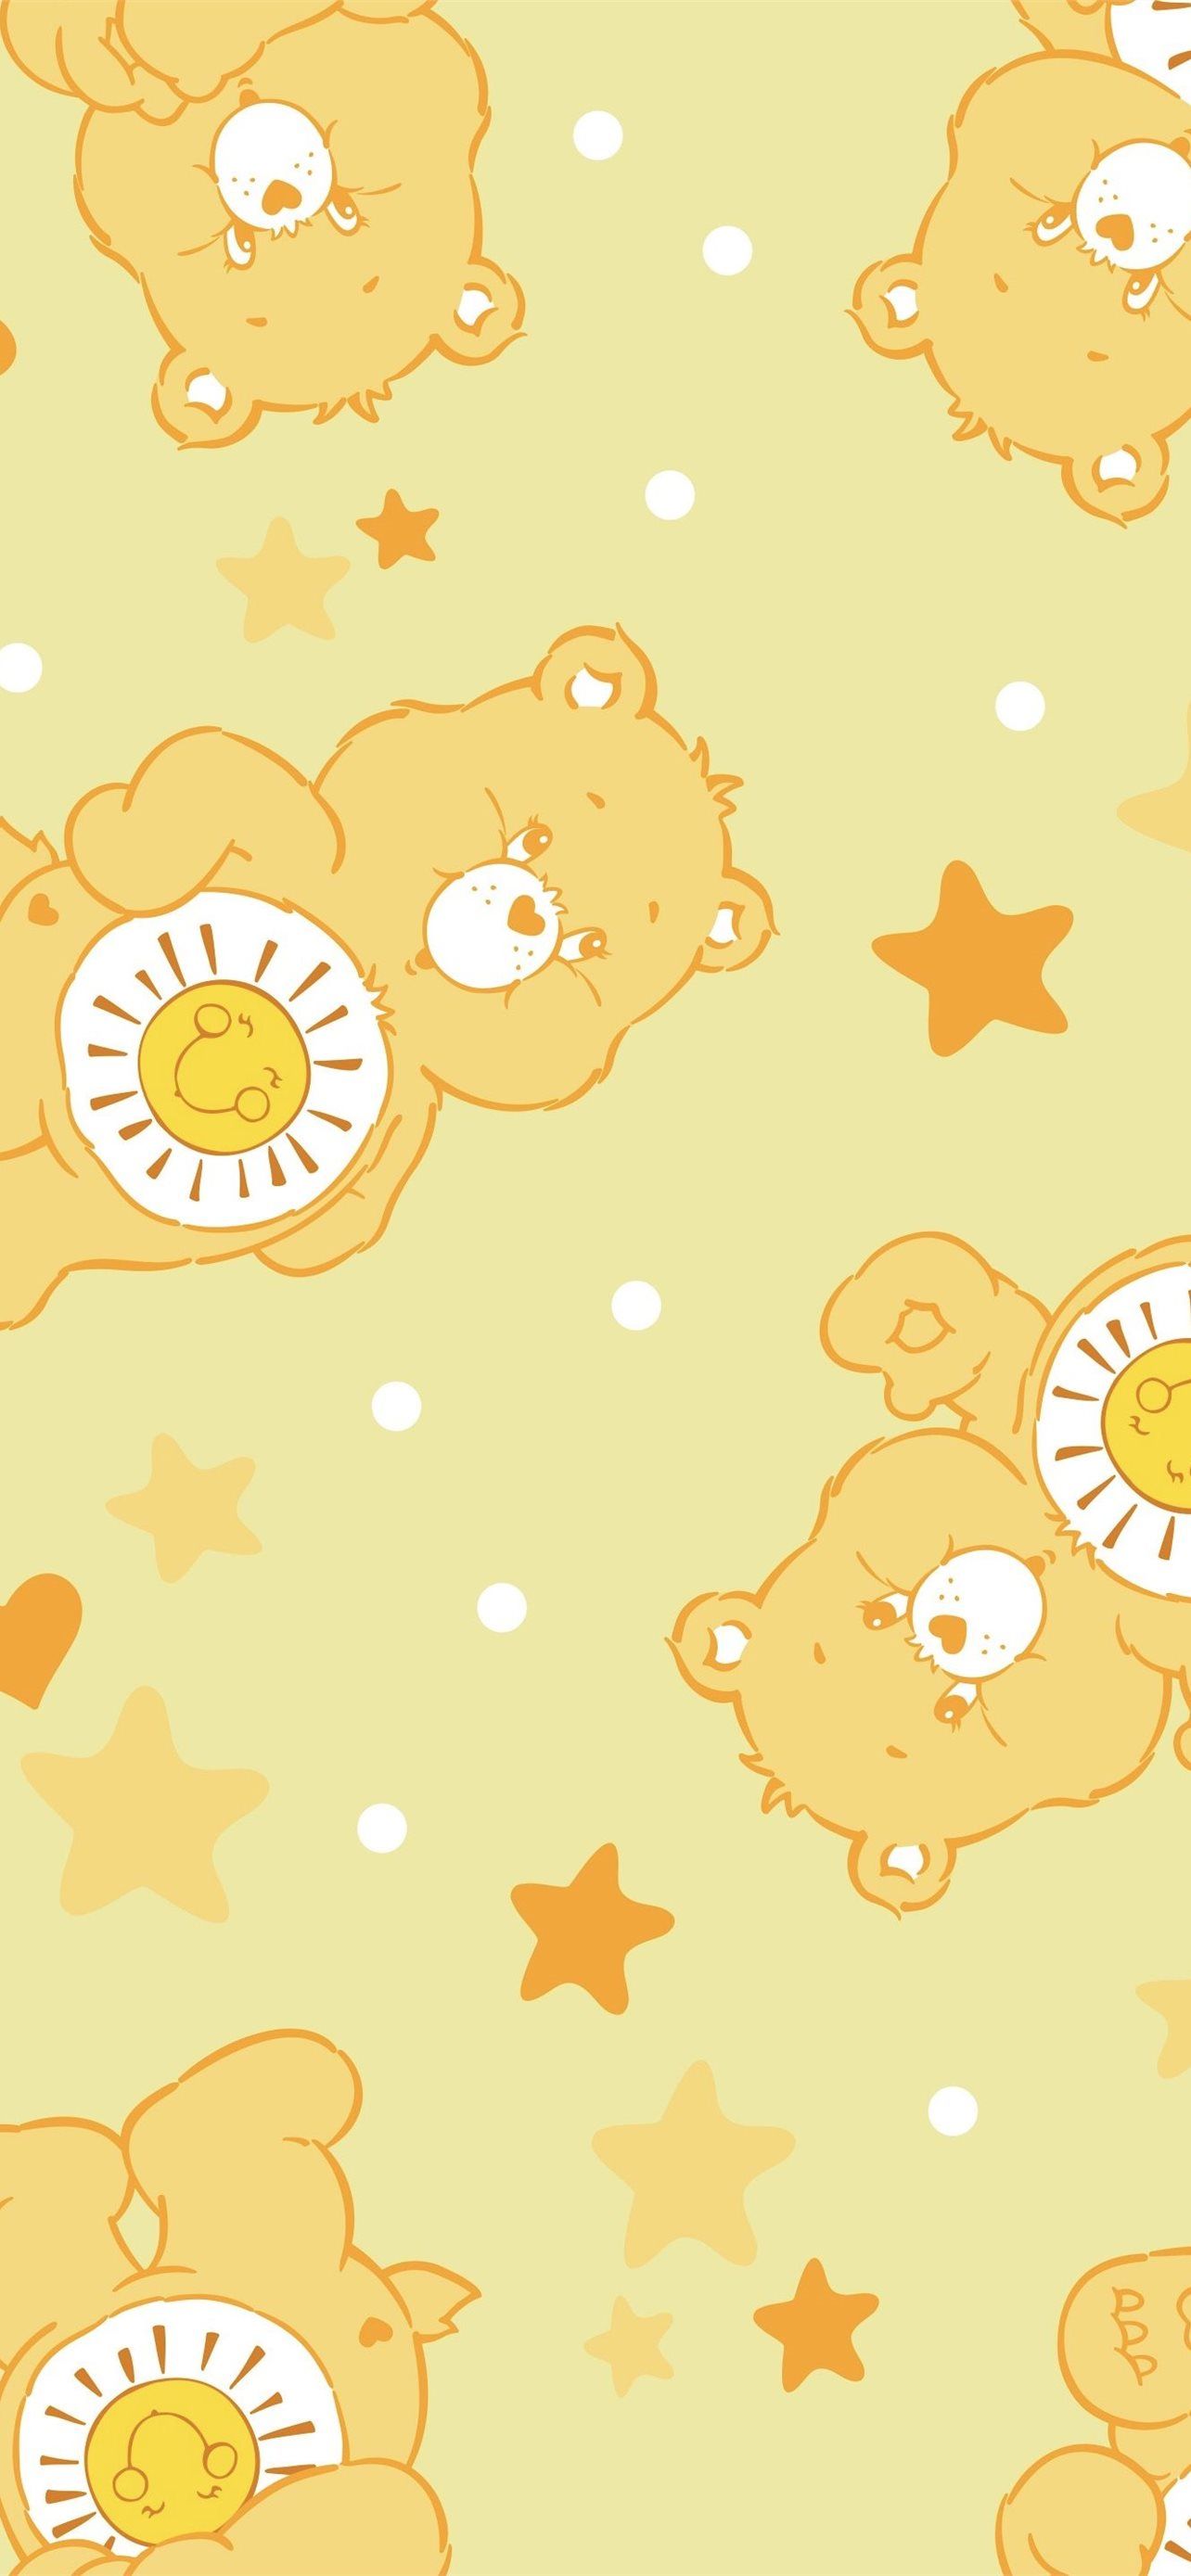 A cute wallpaper of a yellow bear with a sun for a belly - Care Bears